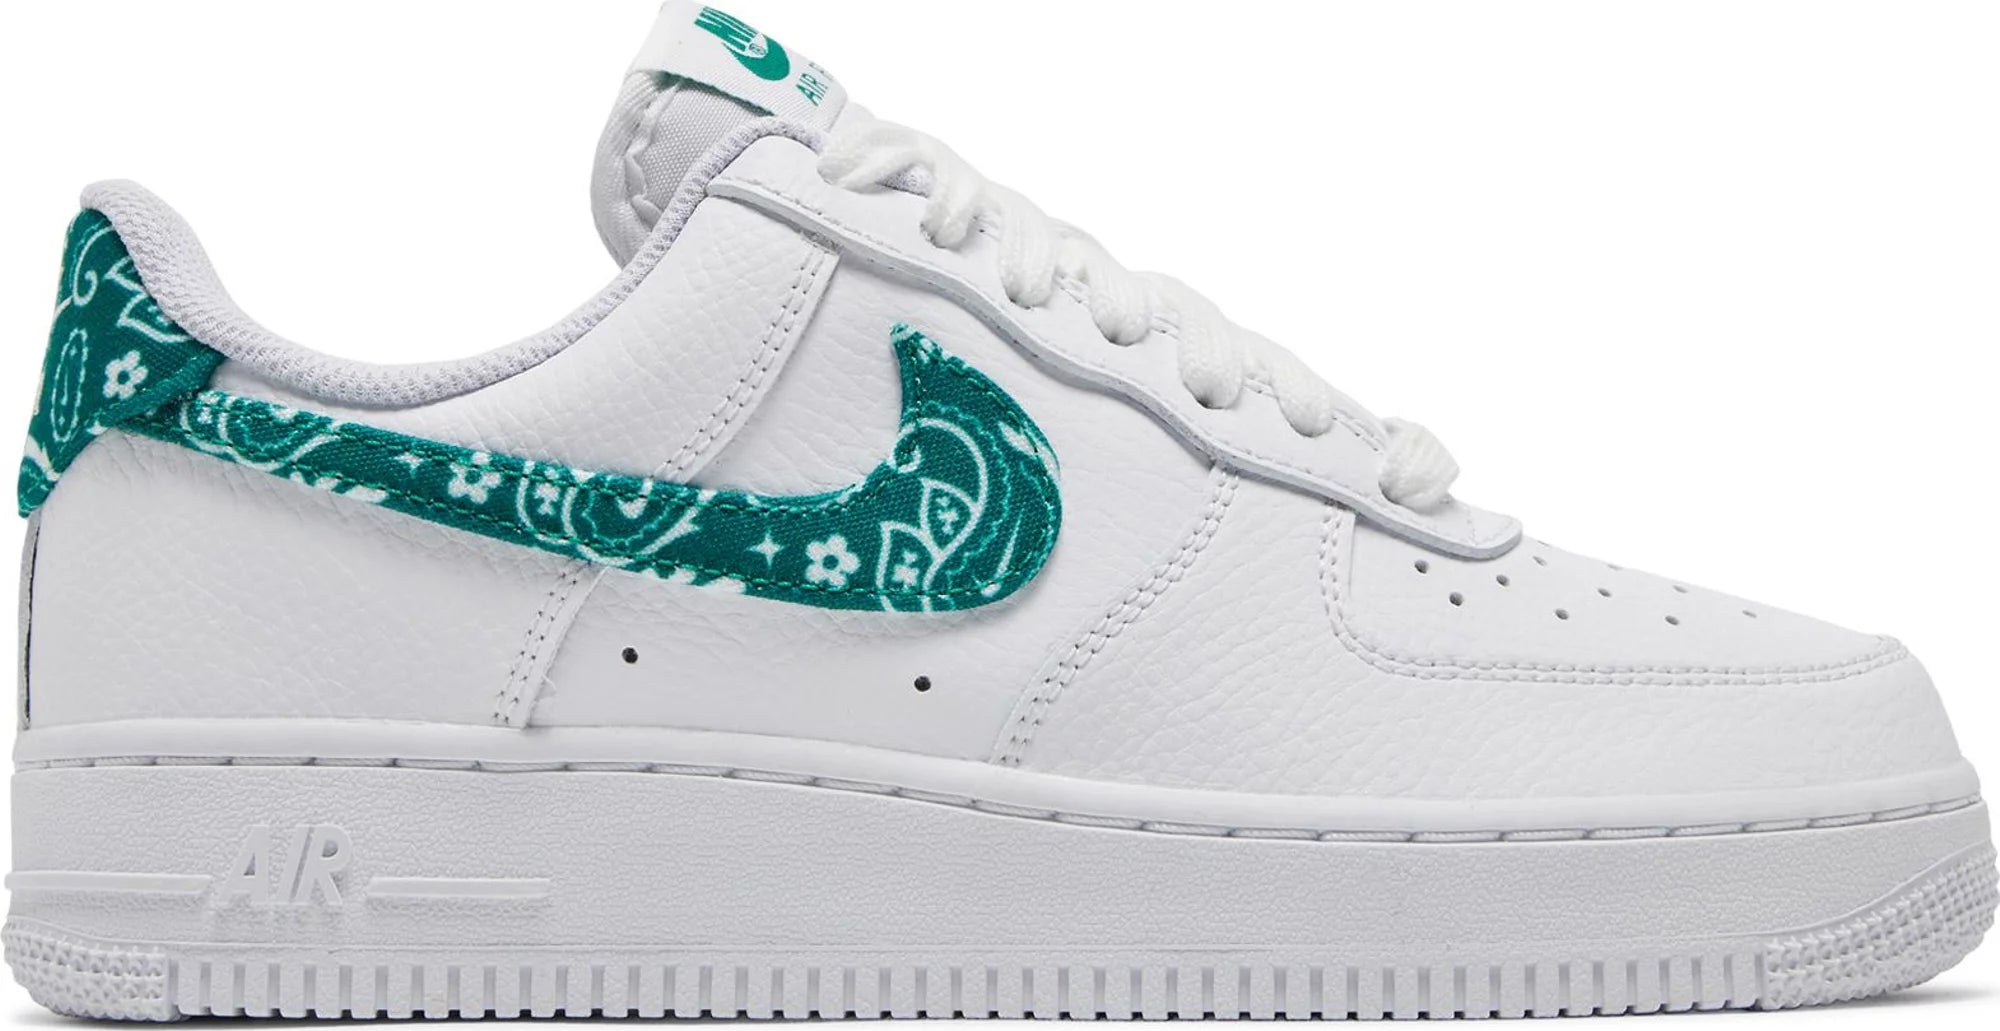 Air Force 1 Low "Green Paisley"